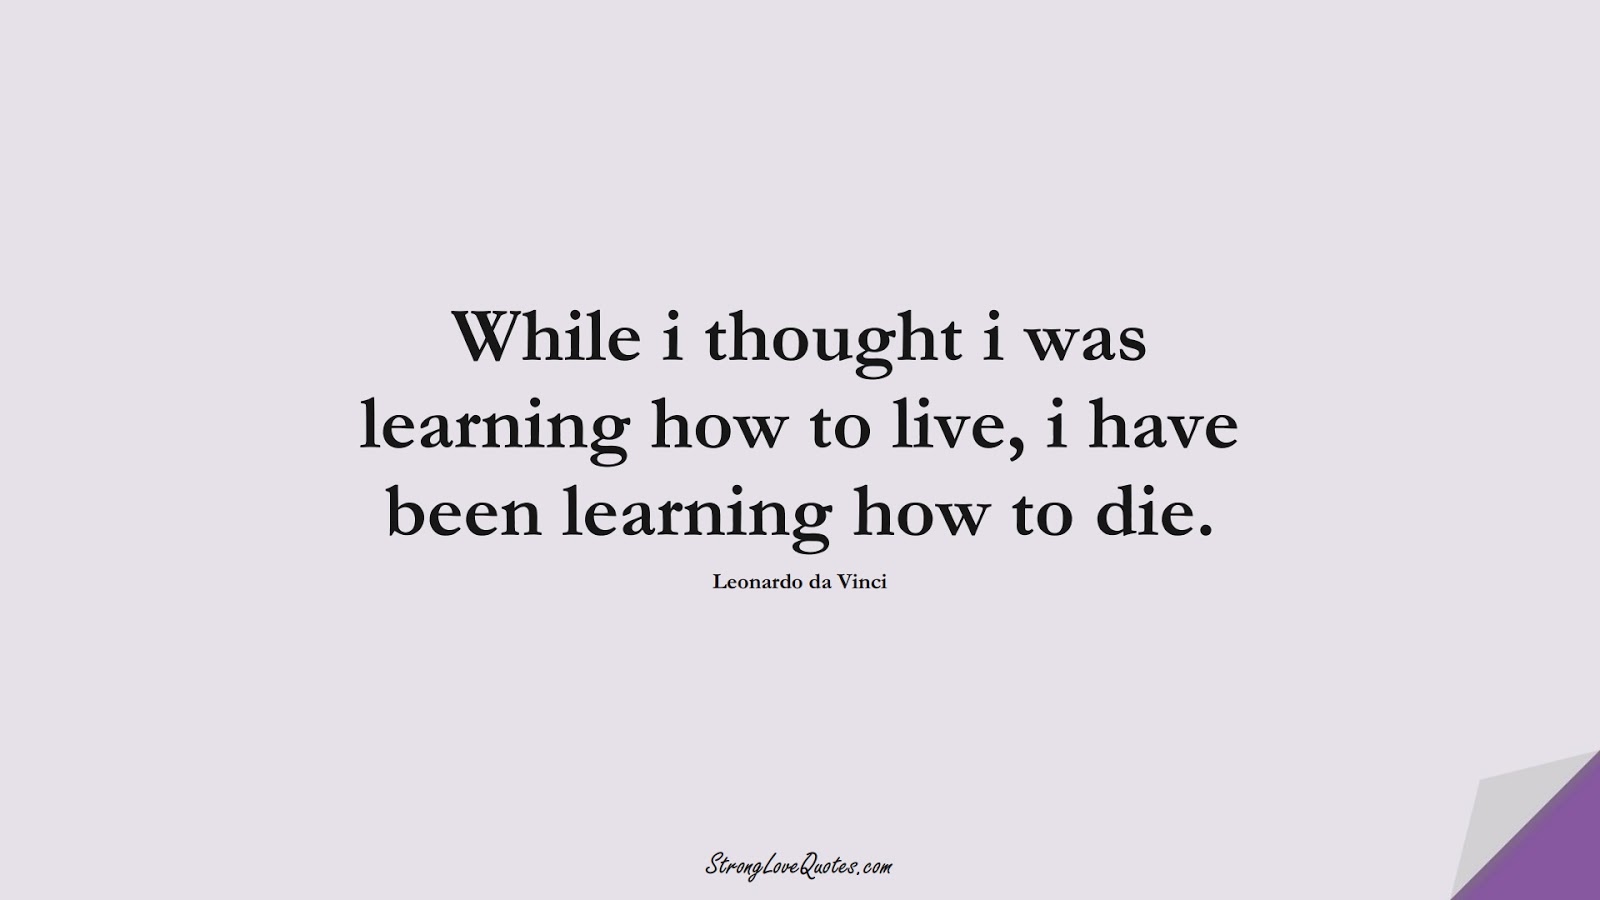 While i thought i was learning how to live, i have been learning how to die. (Leonardo da Vinci);  #LearningQuotes